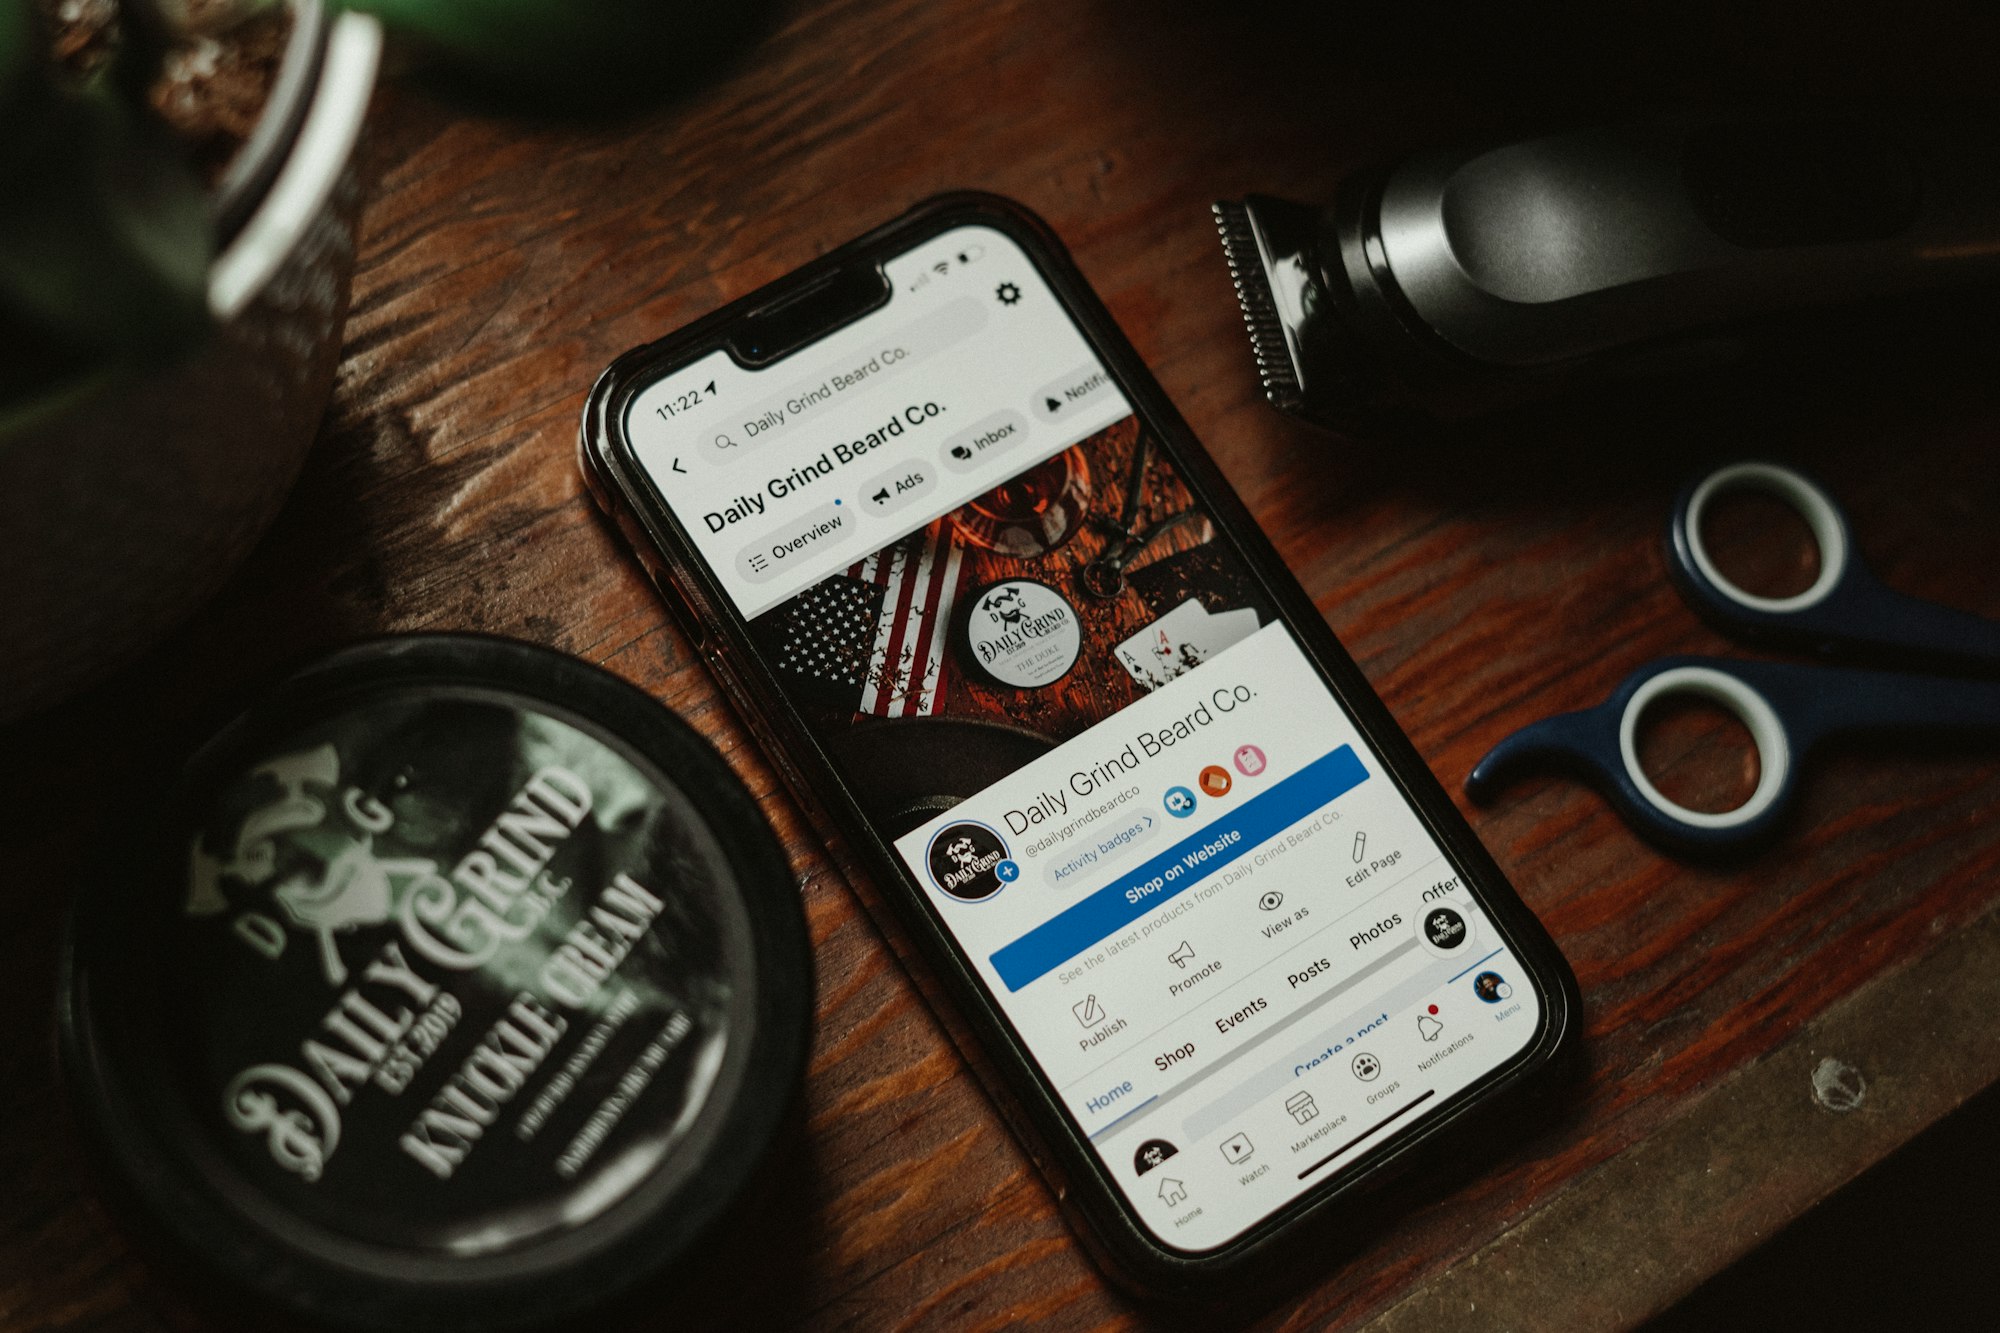 Product photo of Knuckle Cream Beard Balm and social media for Daily Grind Beard Co's facebook page. Product Photography by Lance Reis.